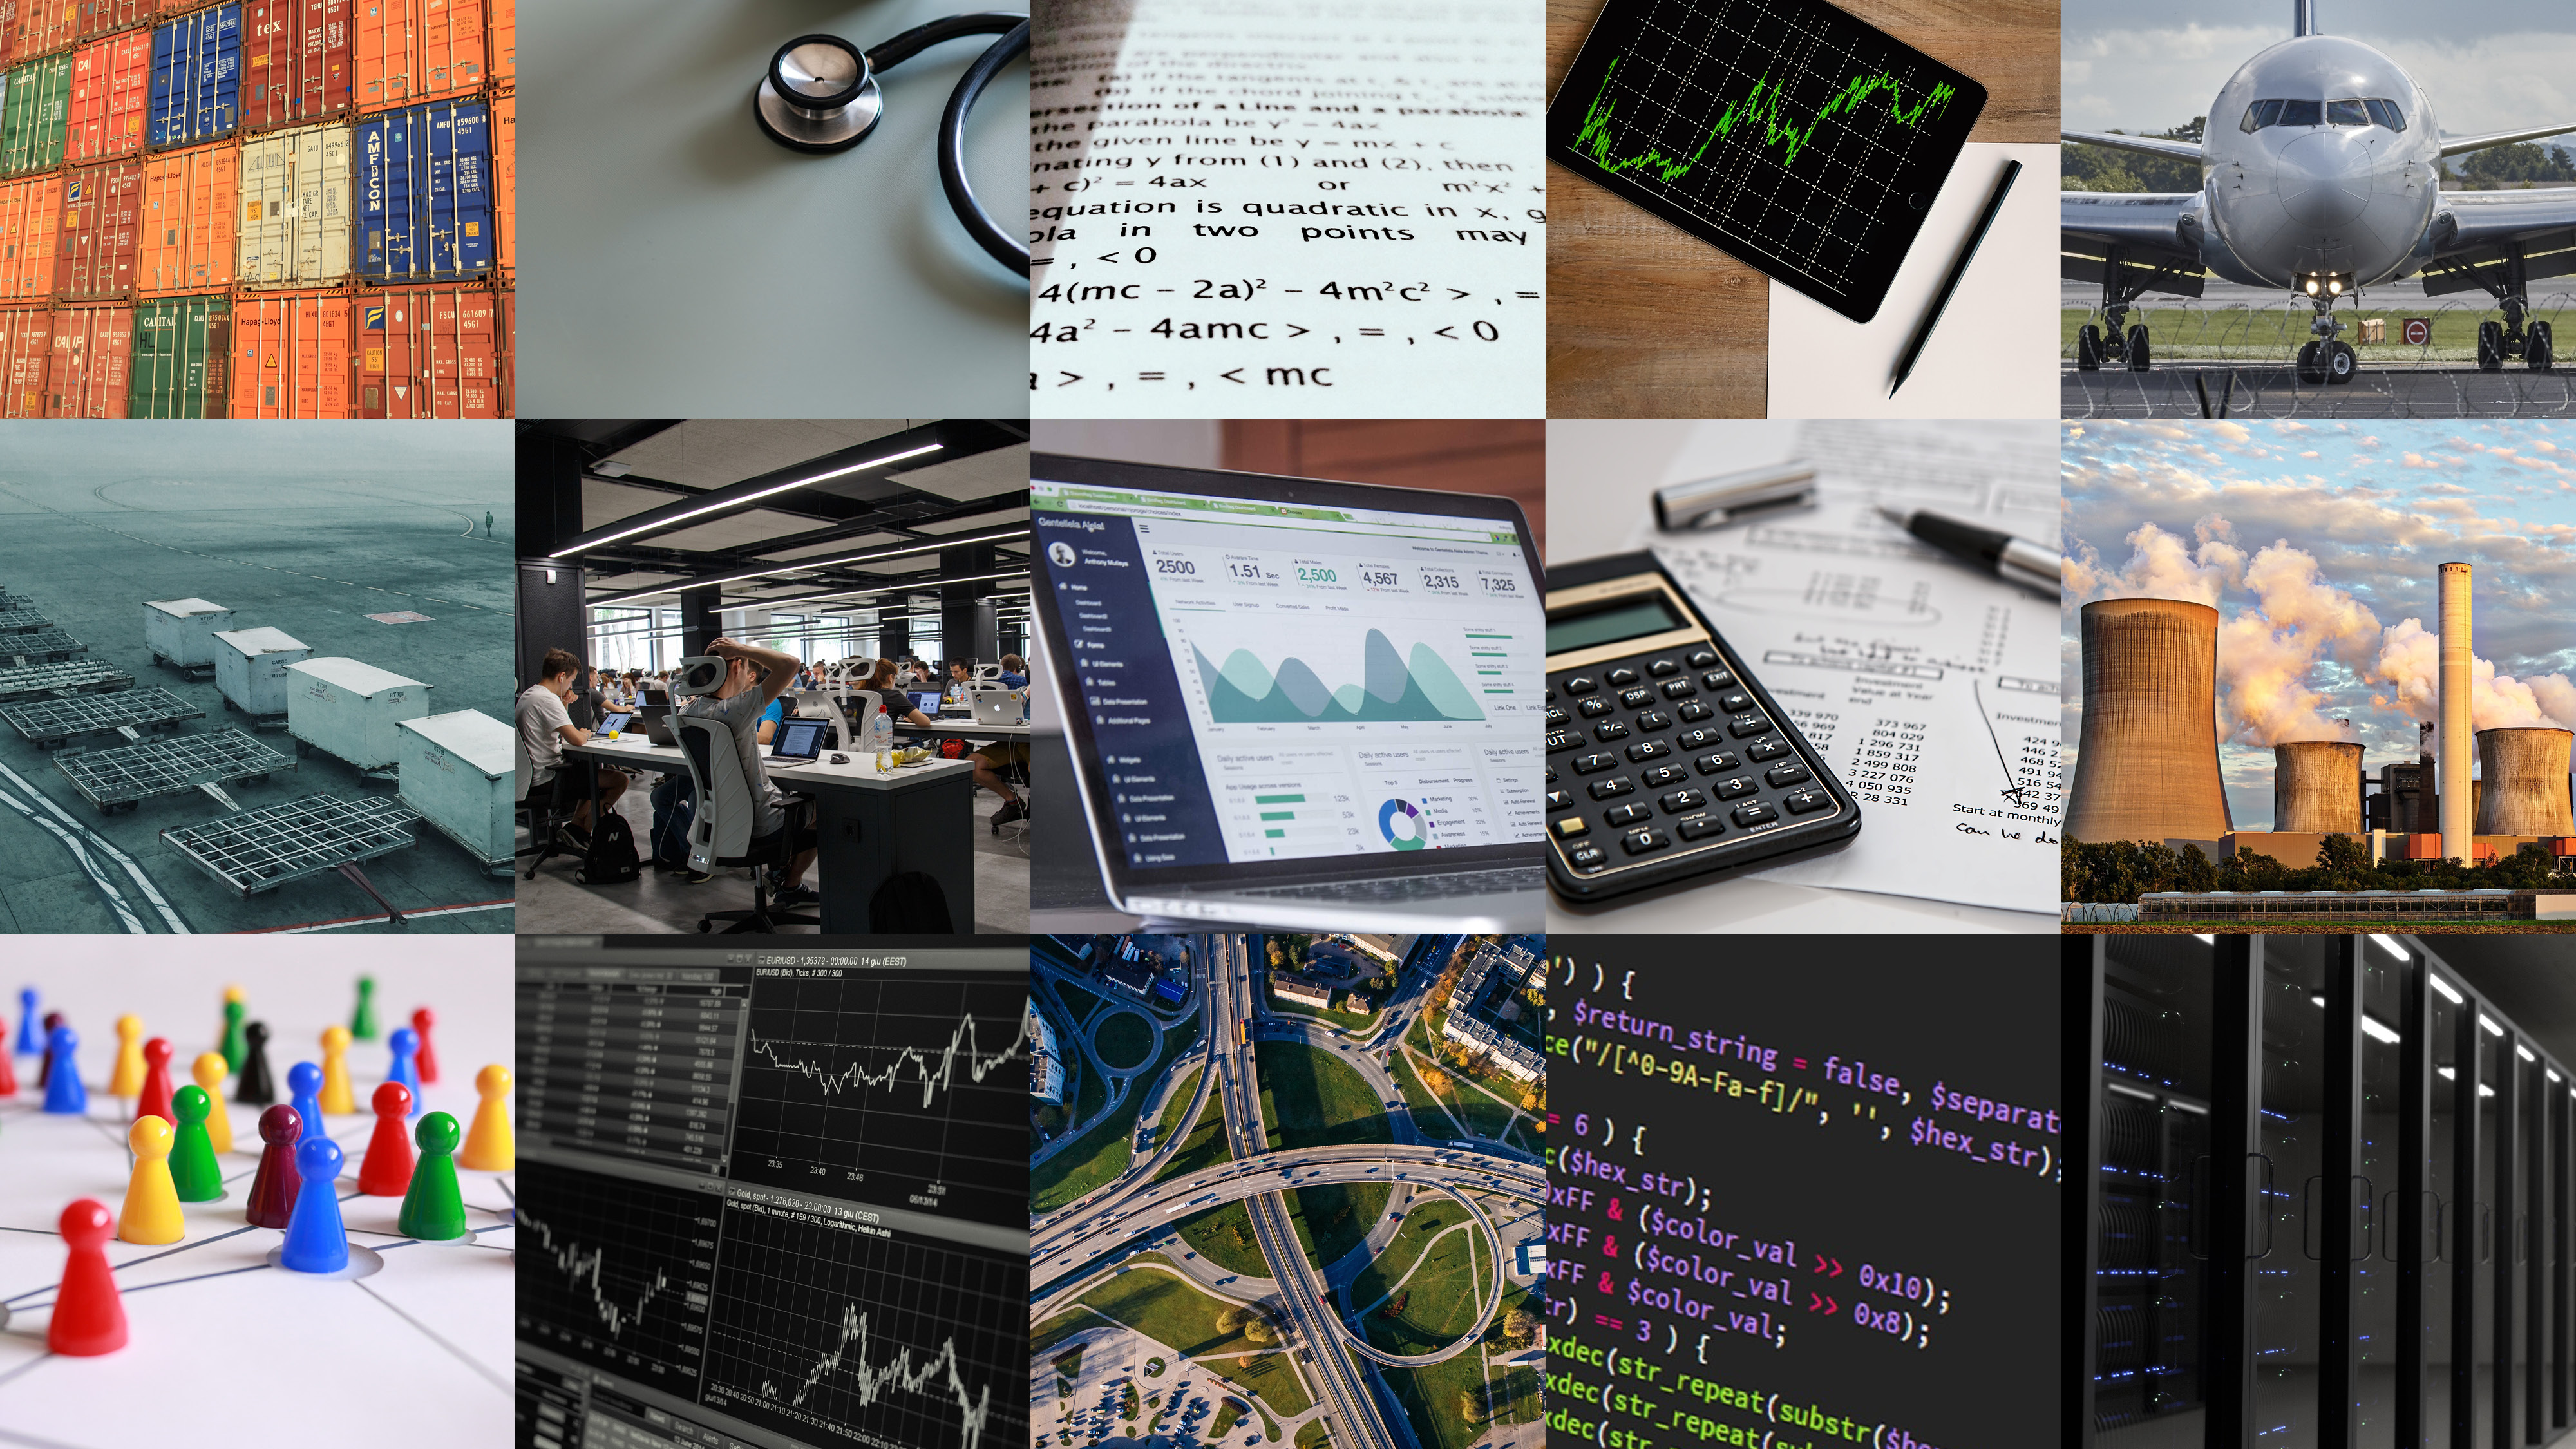 A collage of operations-themed images, including a calculator, a power station, a busy office and some shipping containers